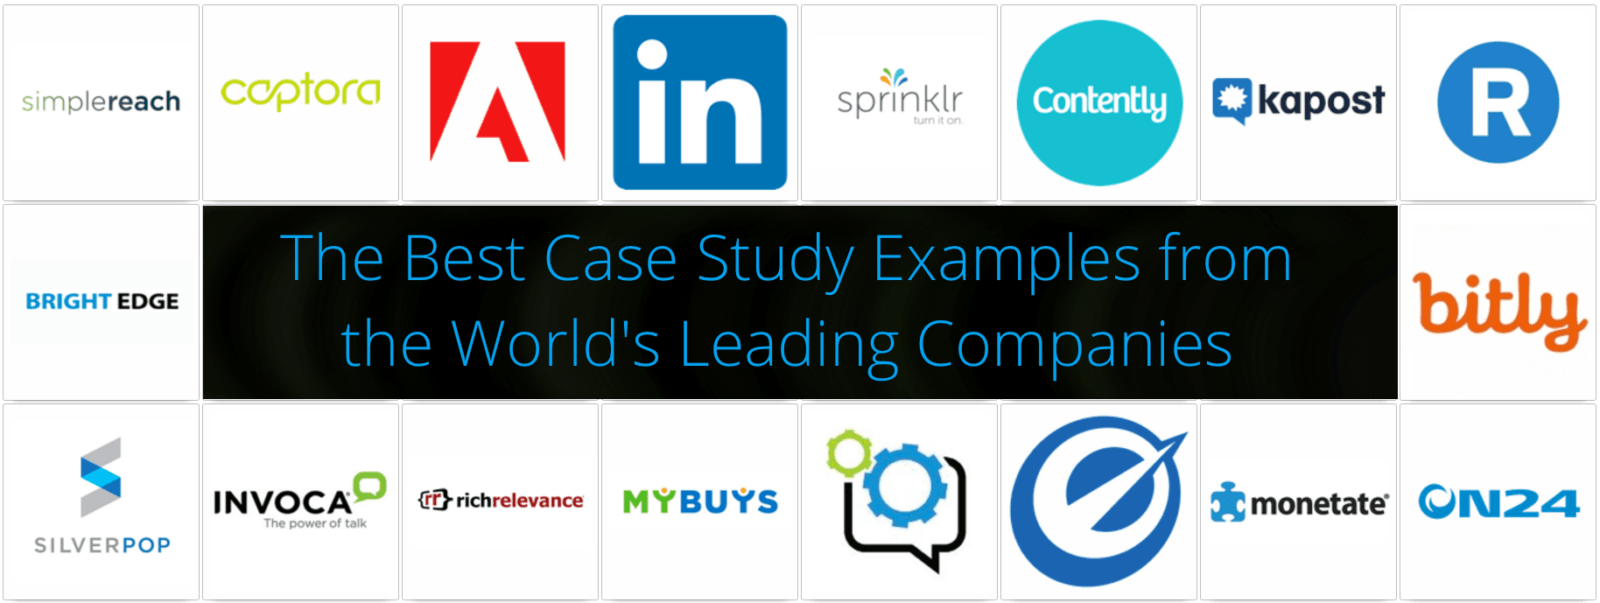 best-case-study-examples-from-the-worlds-leading-companies-min